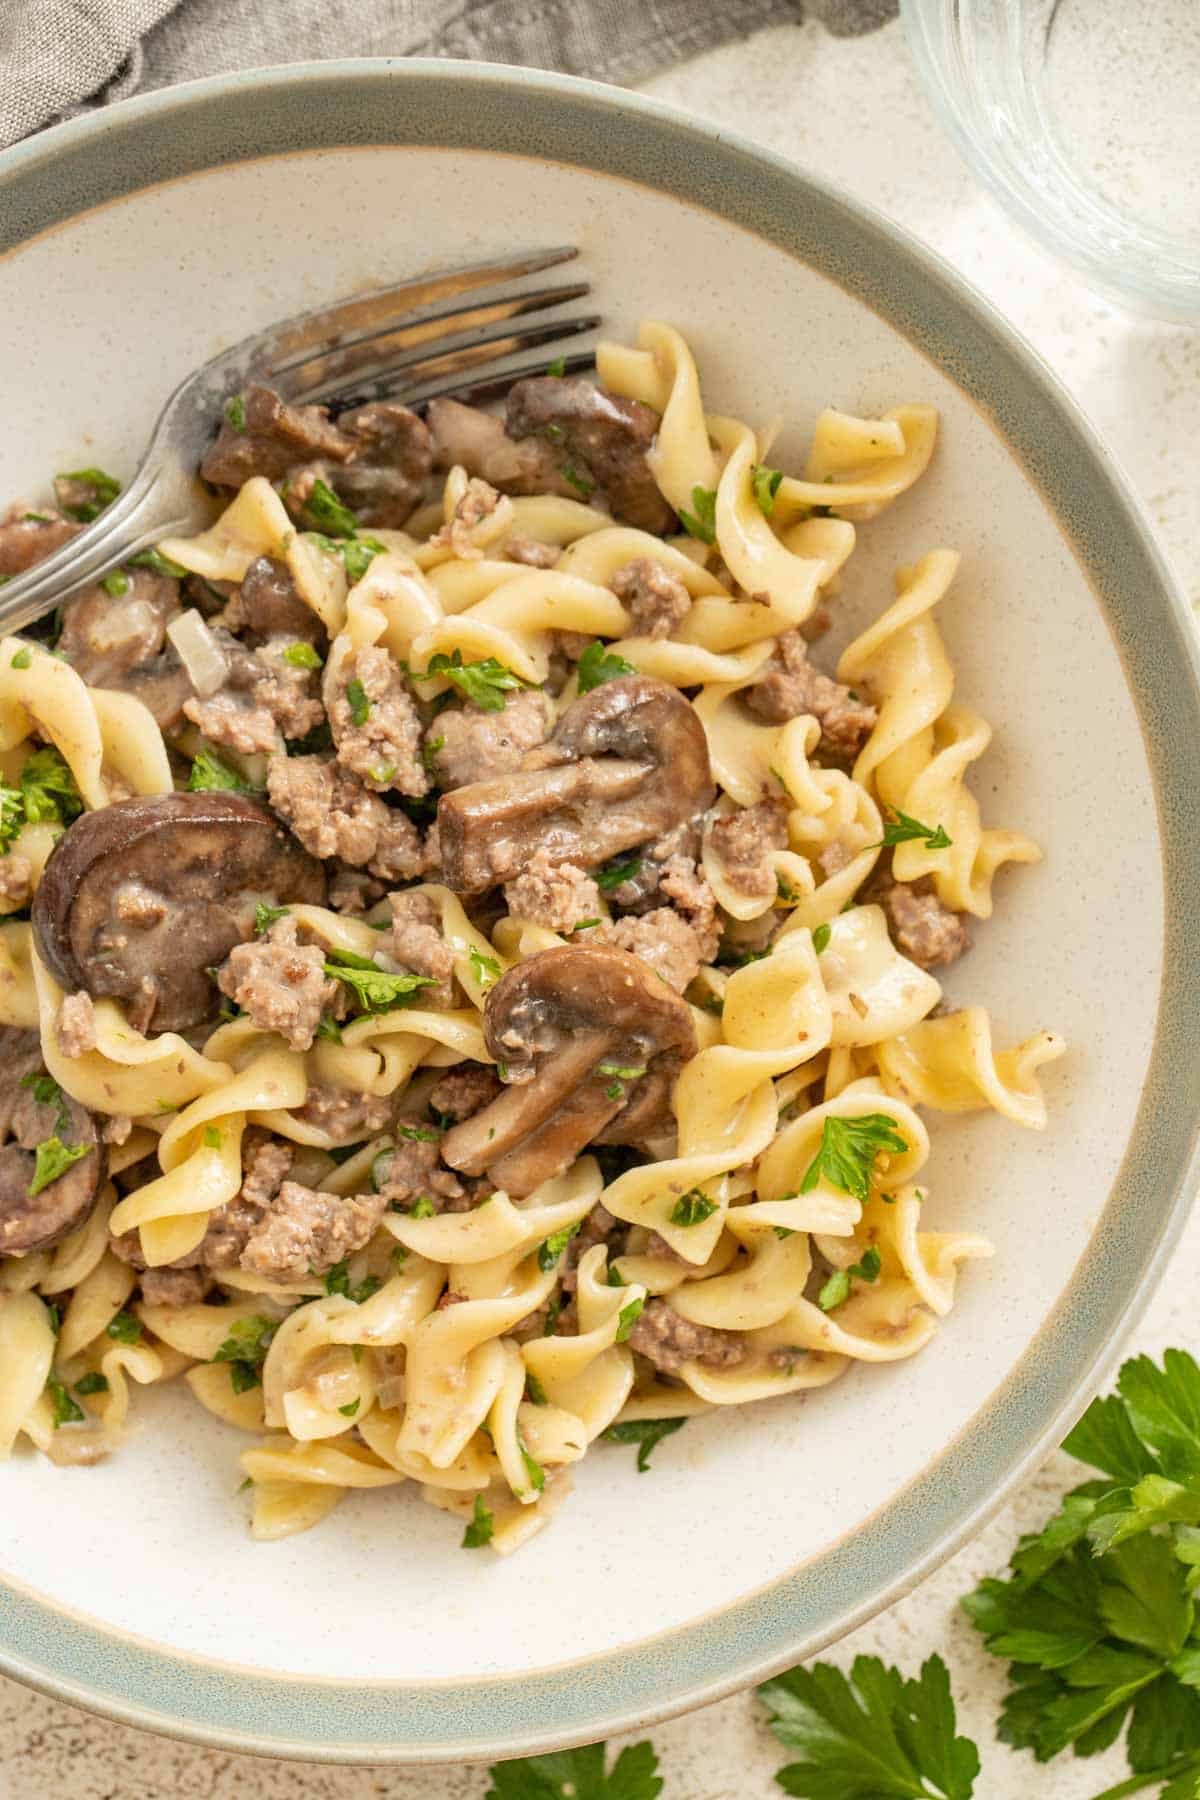 Beef stroganoff in a white bowl with a green rim.